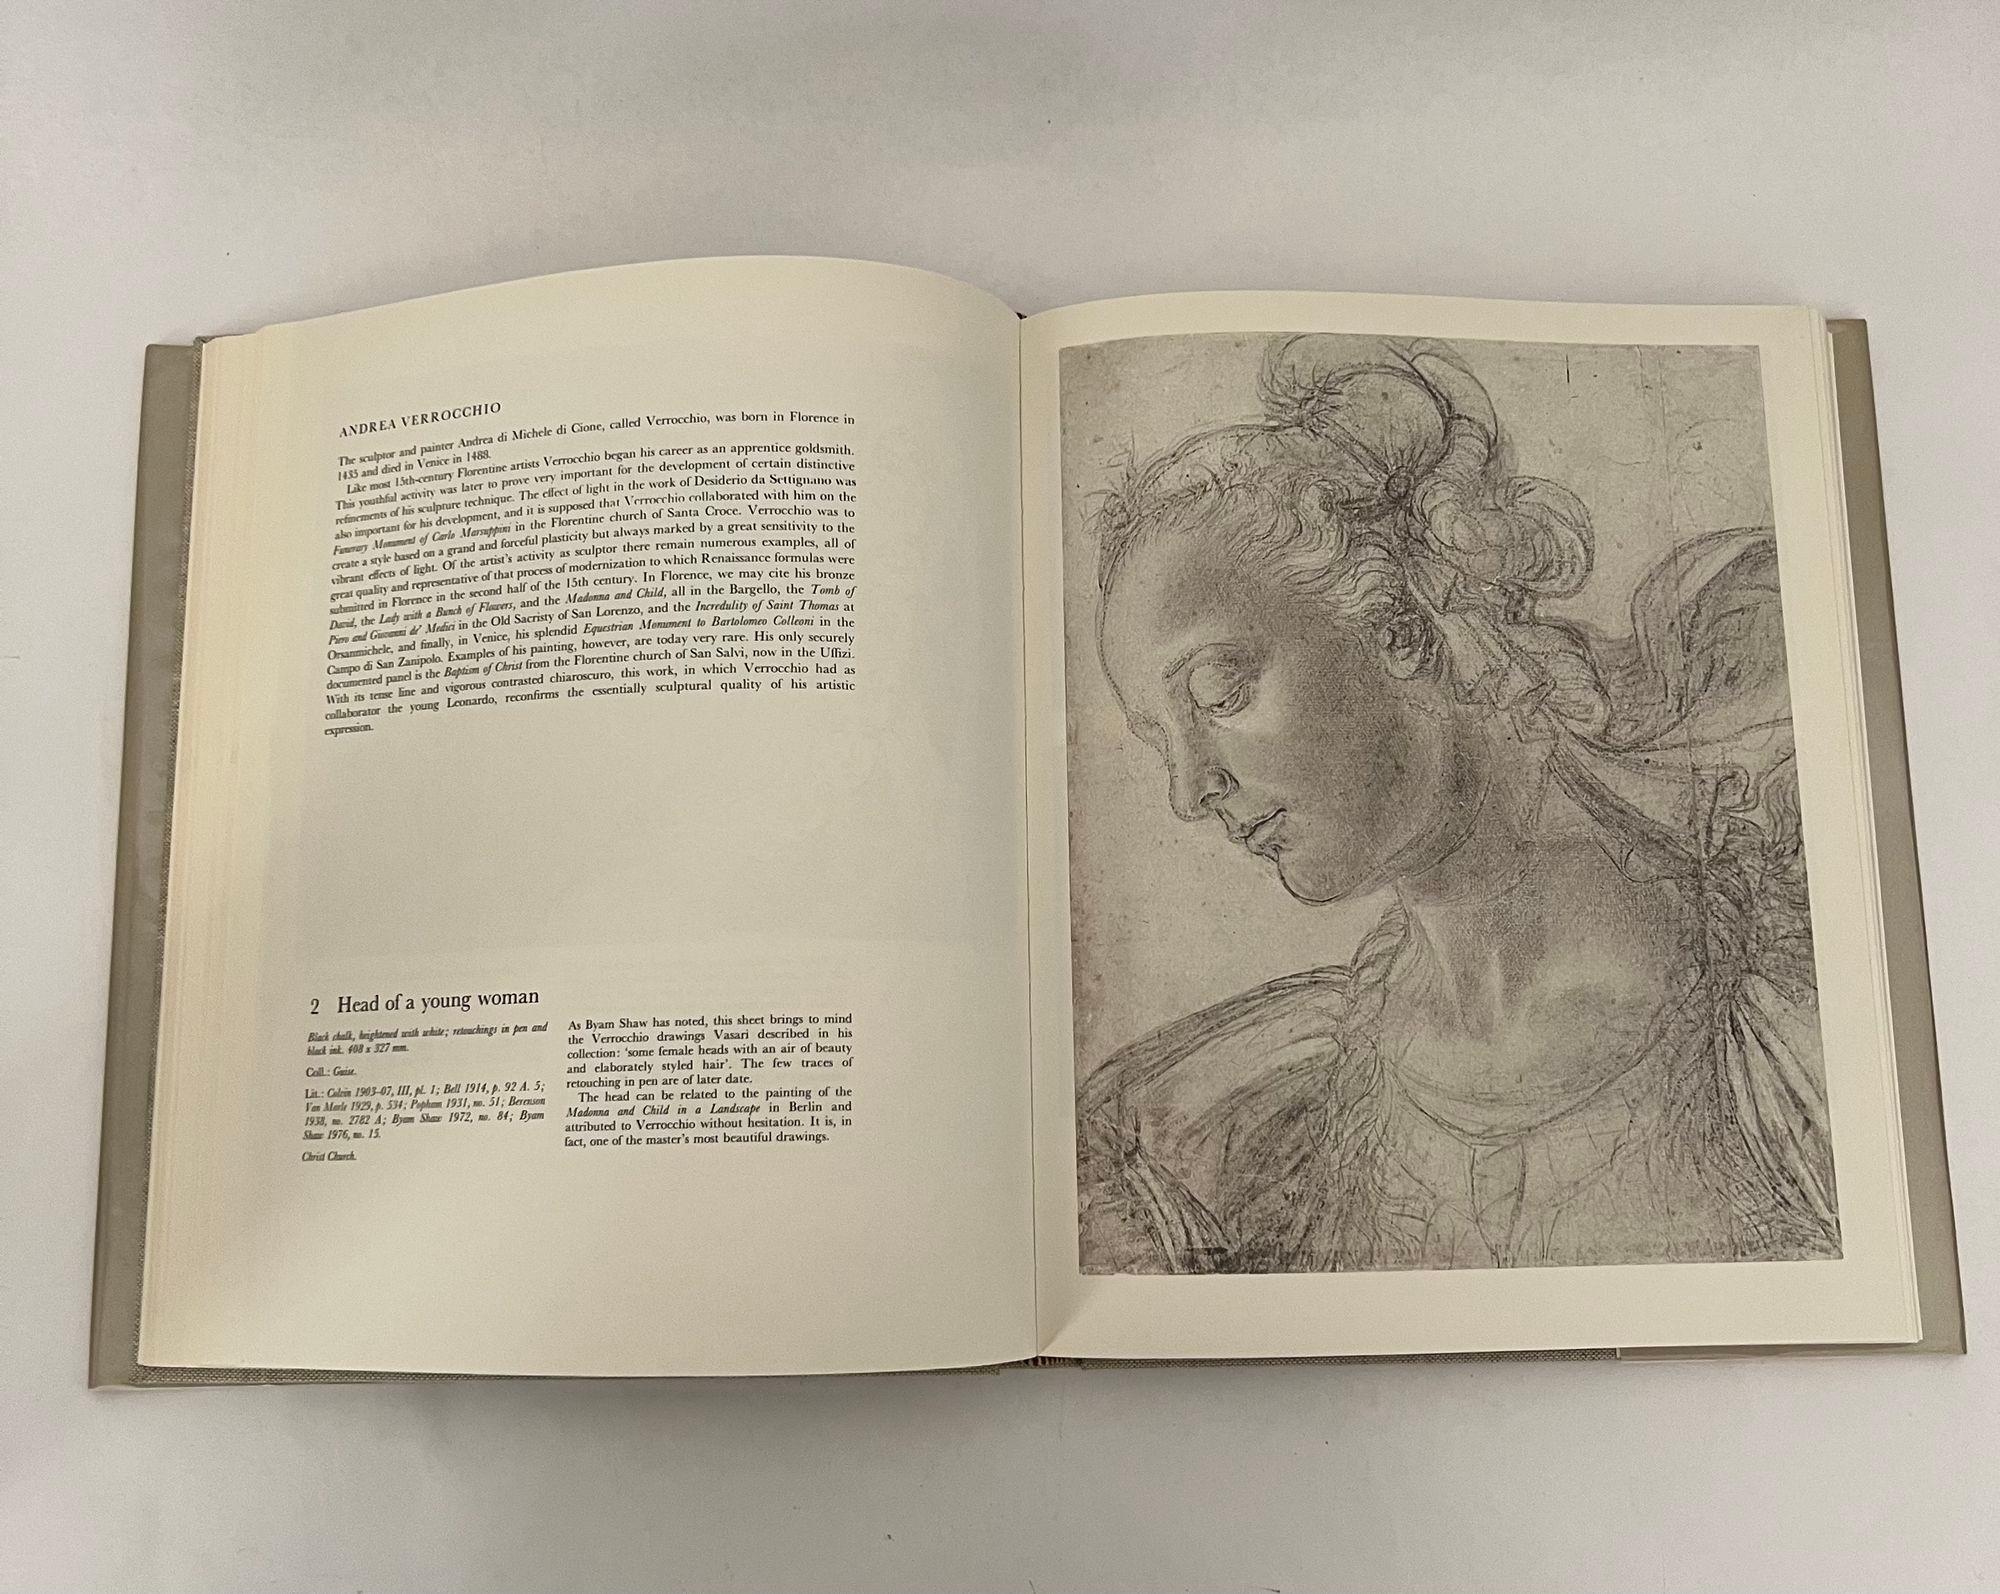 Italian Drawings In Oxford by Terisio Pignatti, First English Publication, 1977 For Sale 1